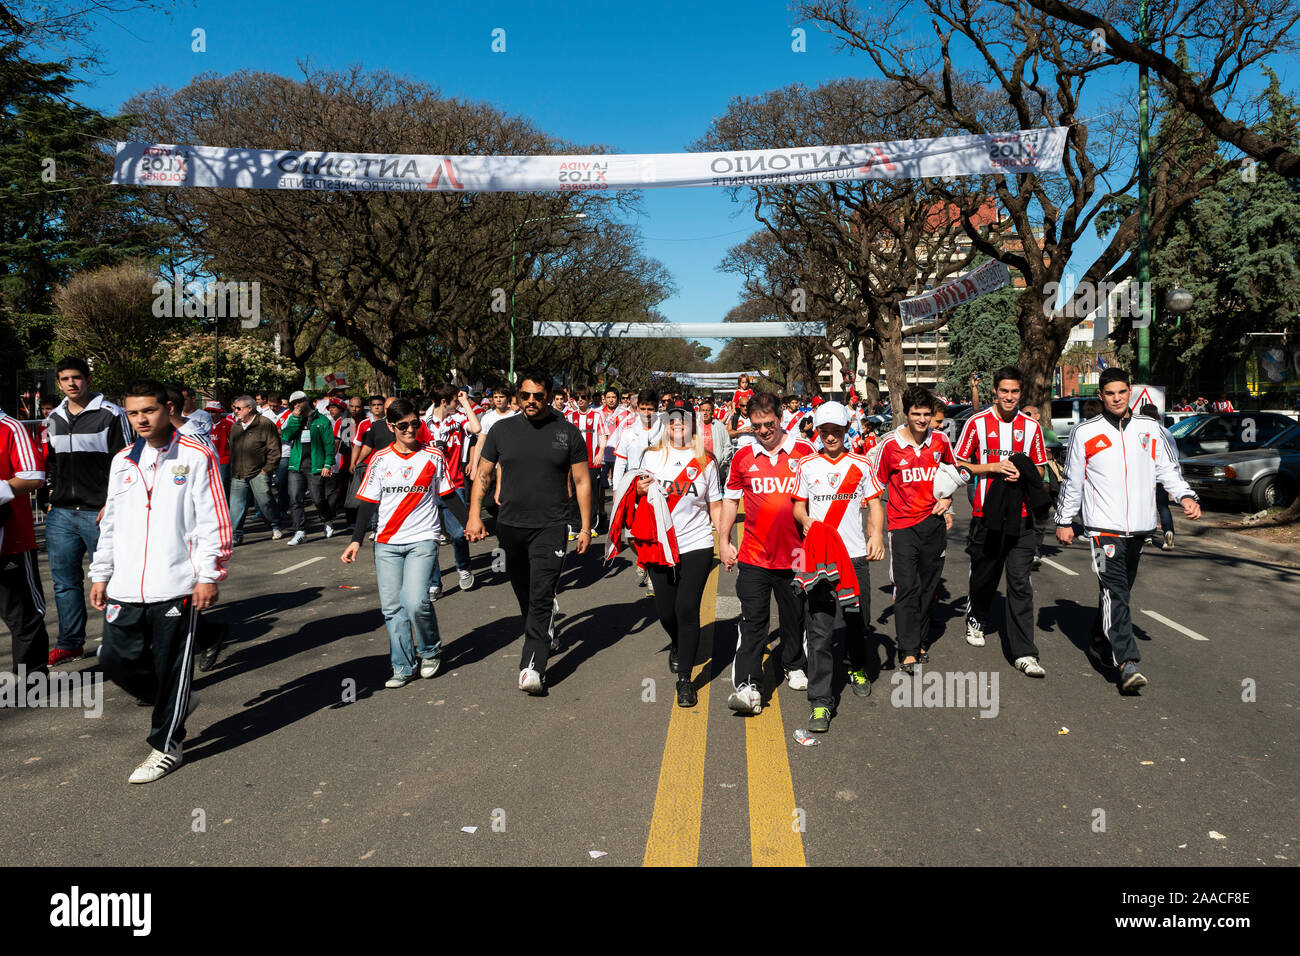 Buenos Aires, Argentina - October 6, 2013: River Plate supporters arriving at the Estadio Monumental Antonio Vespucio Liberti for a soccer game in the Stock Photo